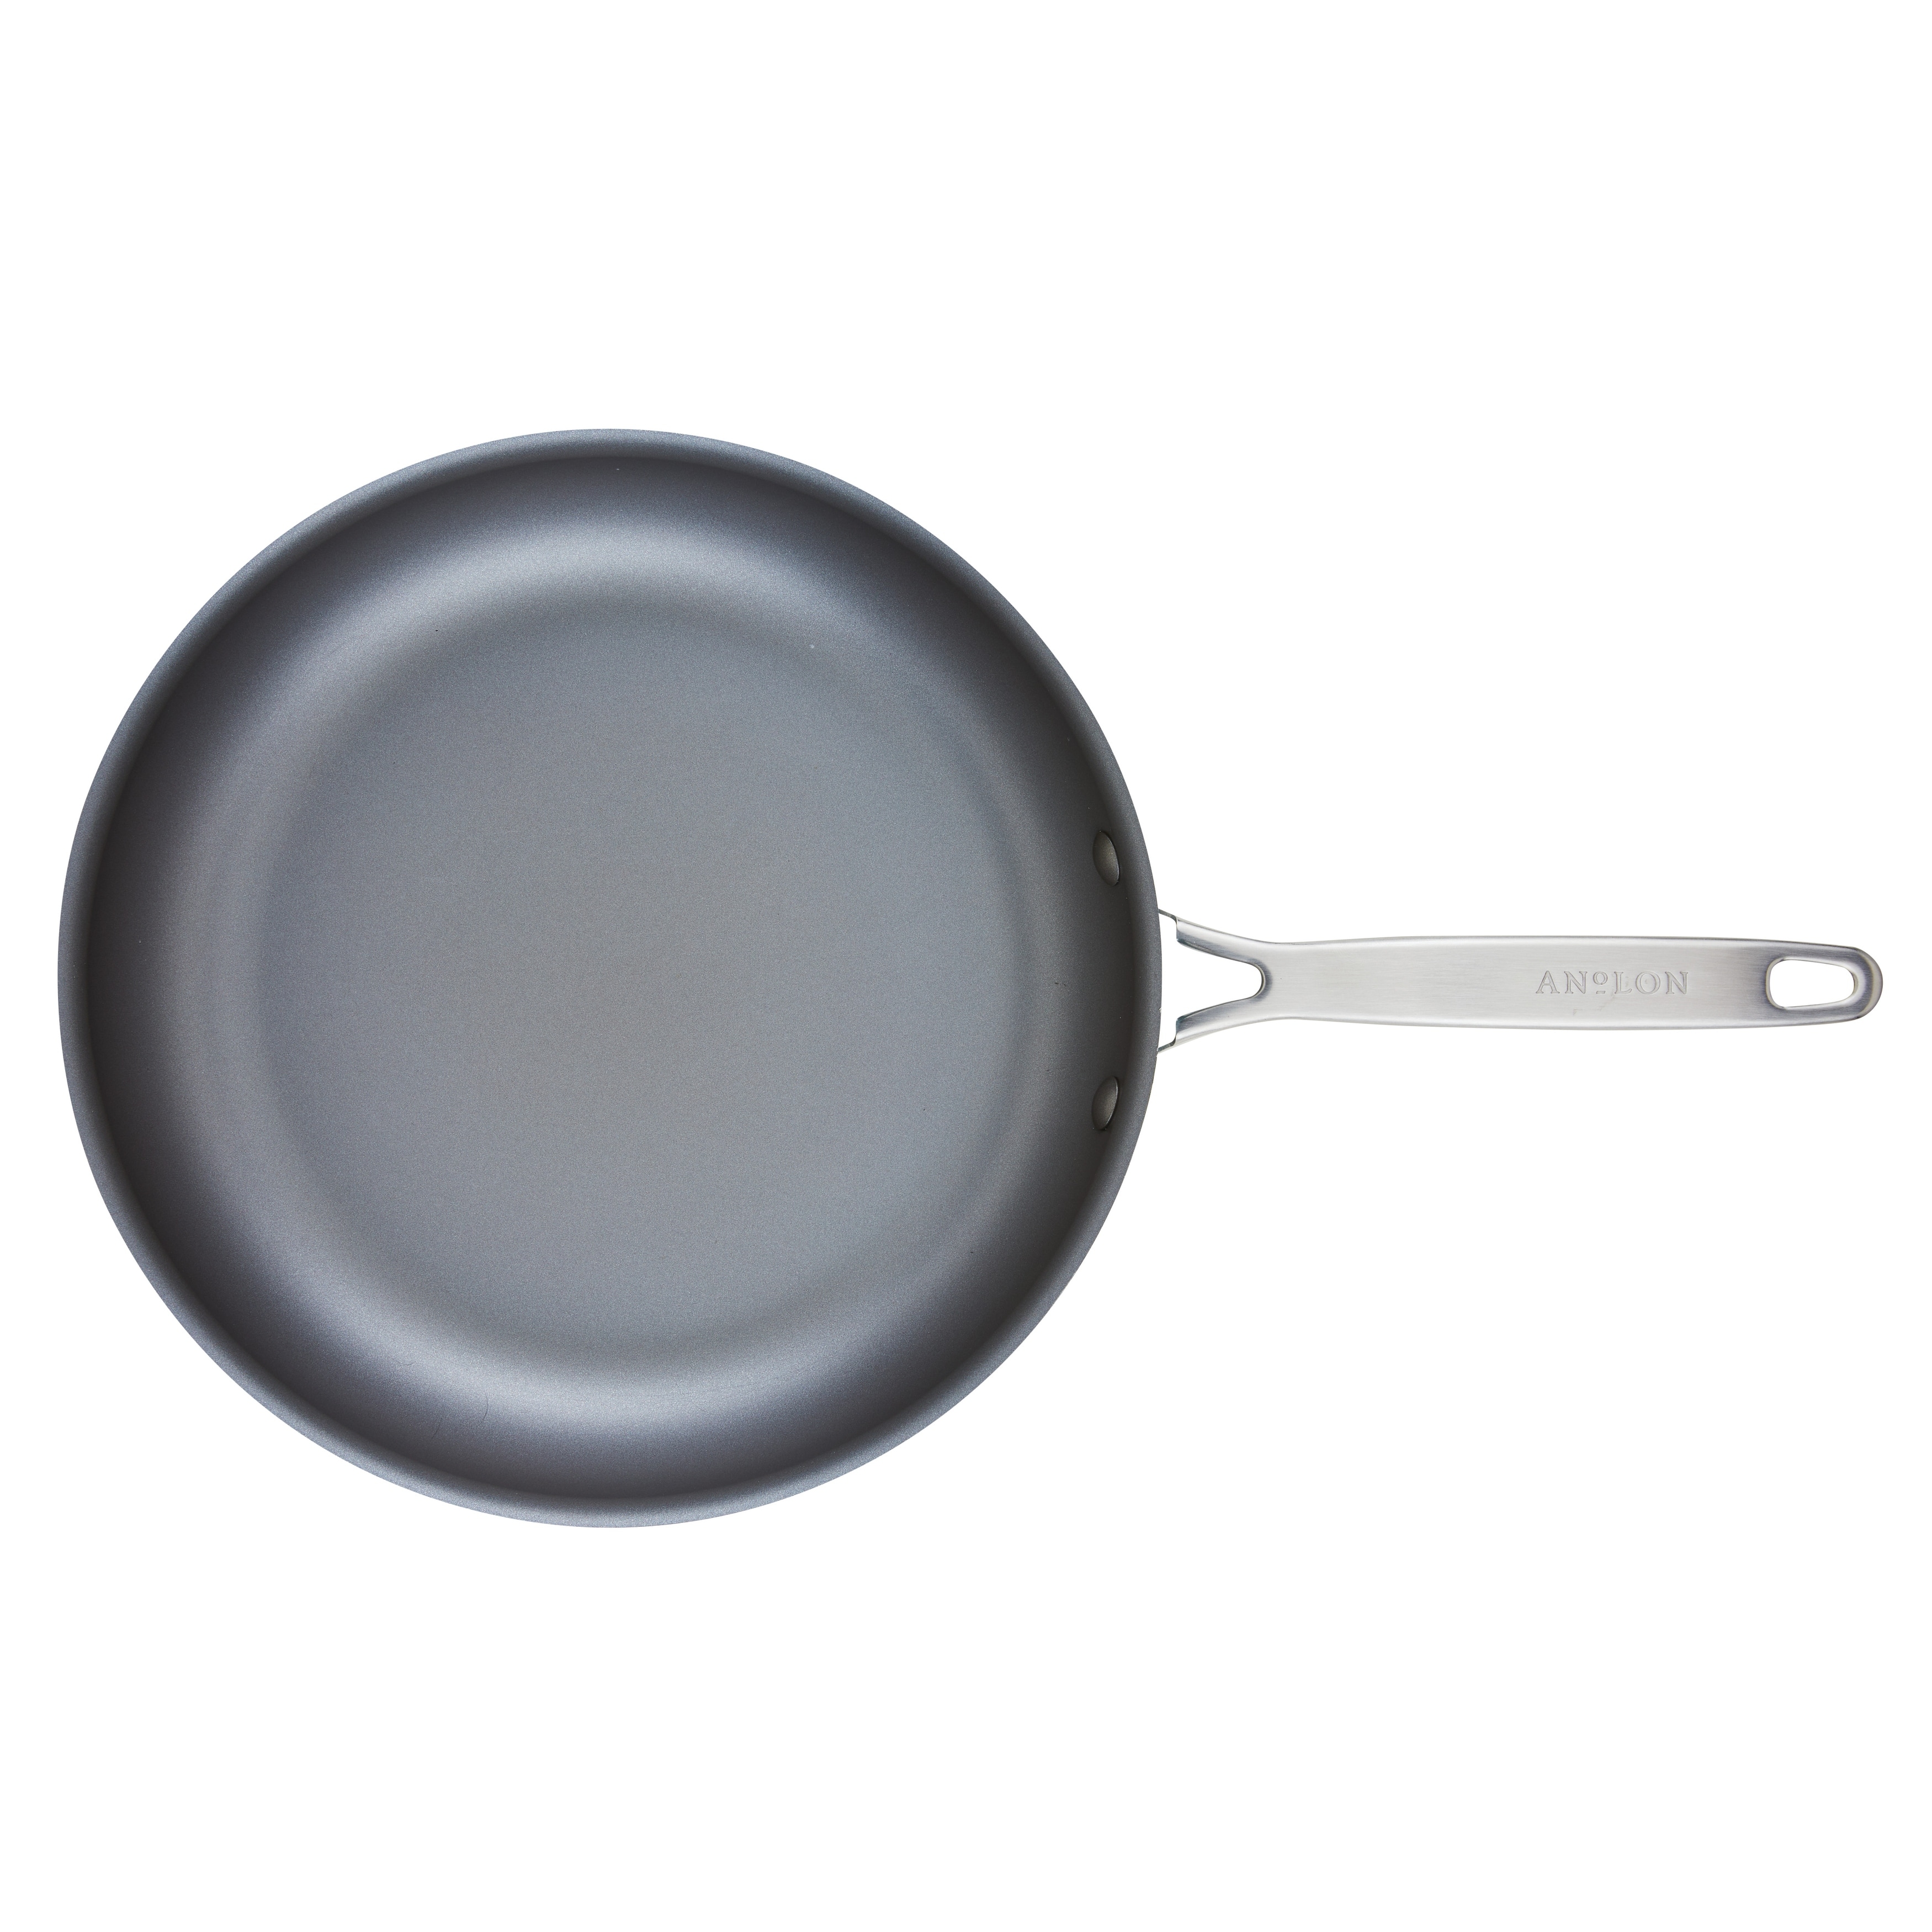 https://ak1.ostkcdn.com/images/products/is/images/direct/dfcbfb0f01e5a0ea3f384904aa5bac08c3620fce/Anolon-Achieve-Hard-Anodized-Nonstick-Frying-Pan%2C-12-Inch.jpg